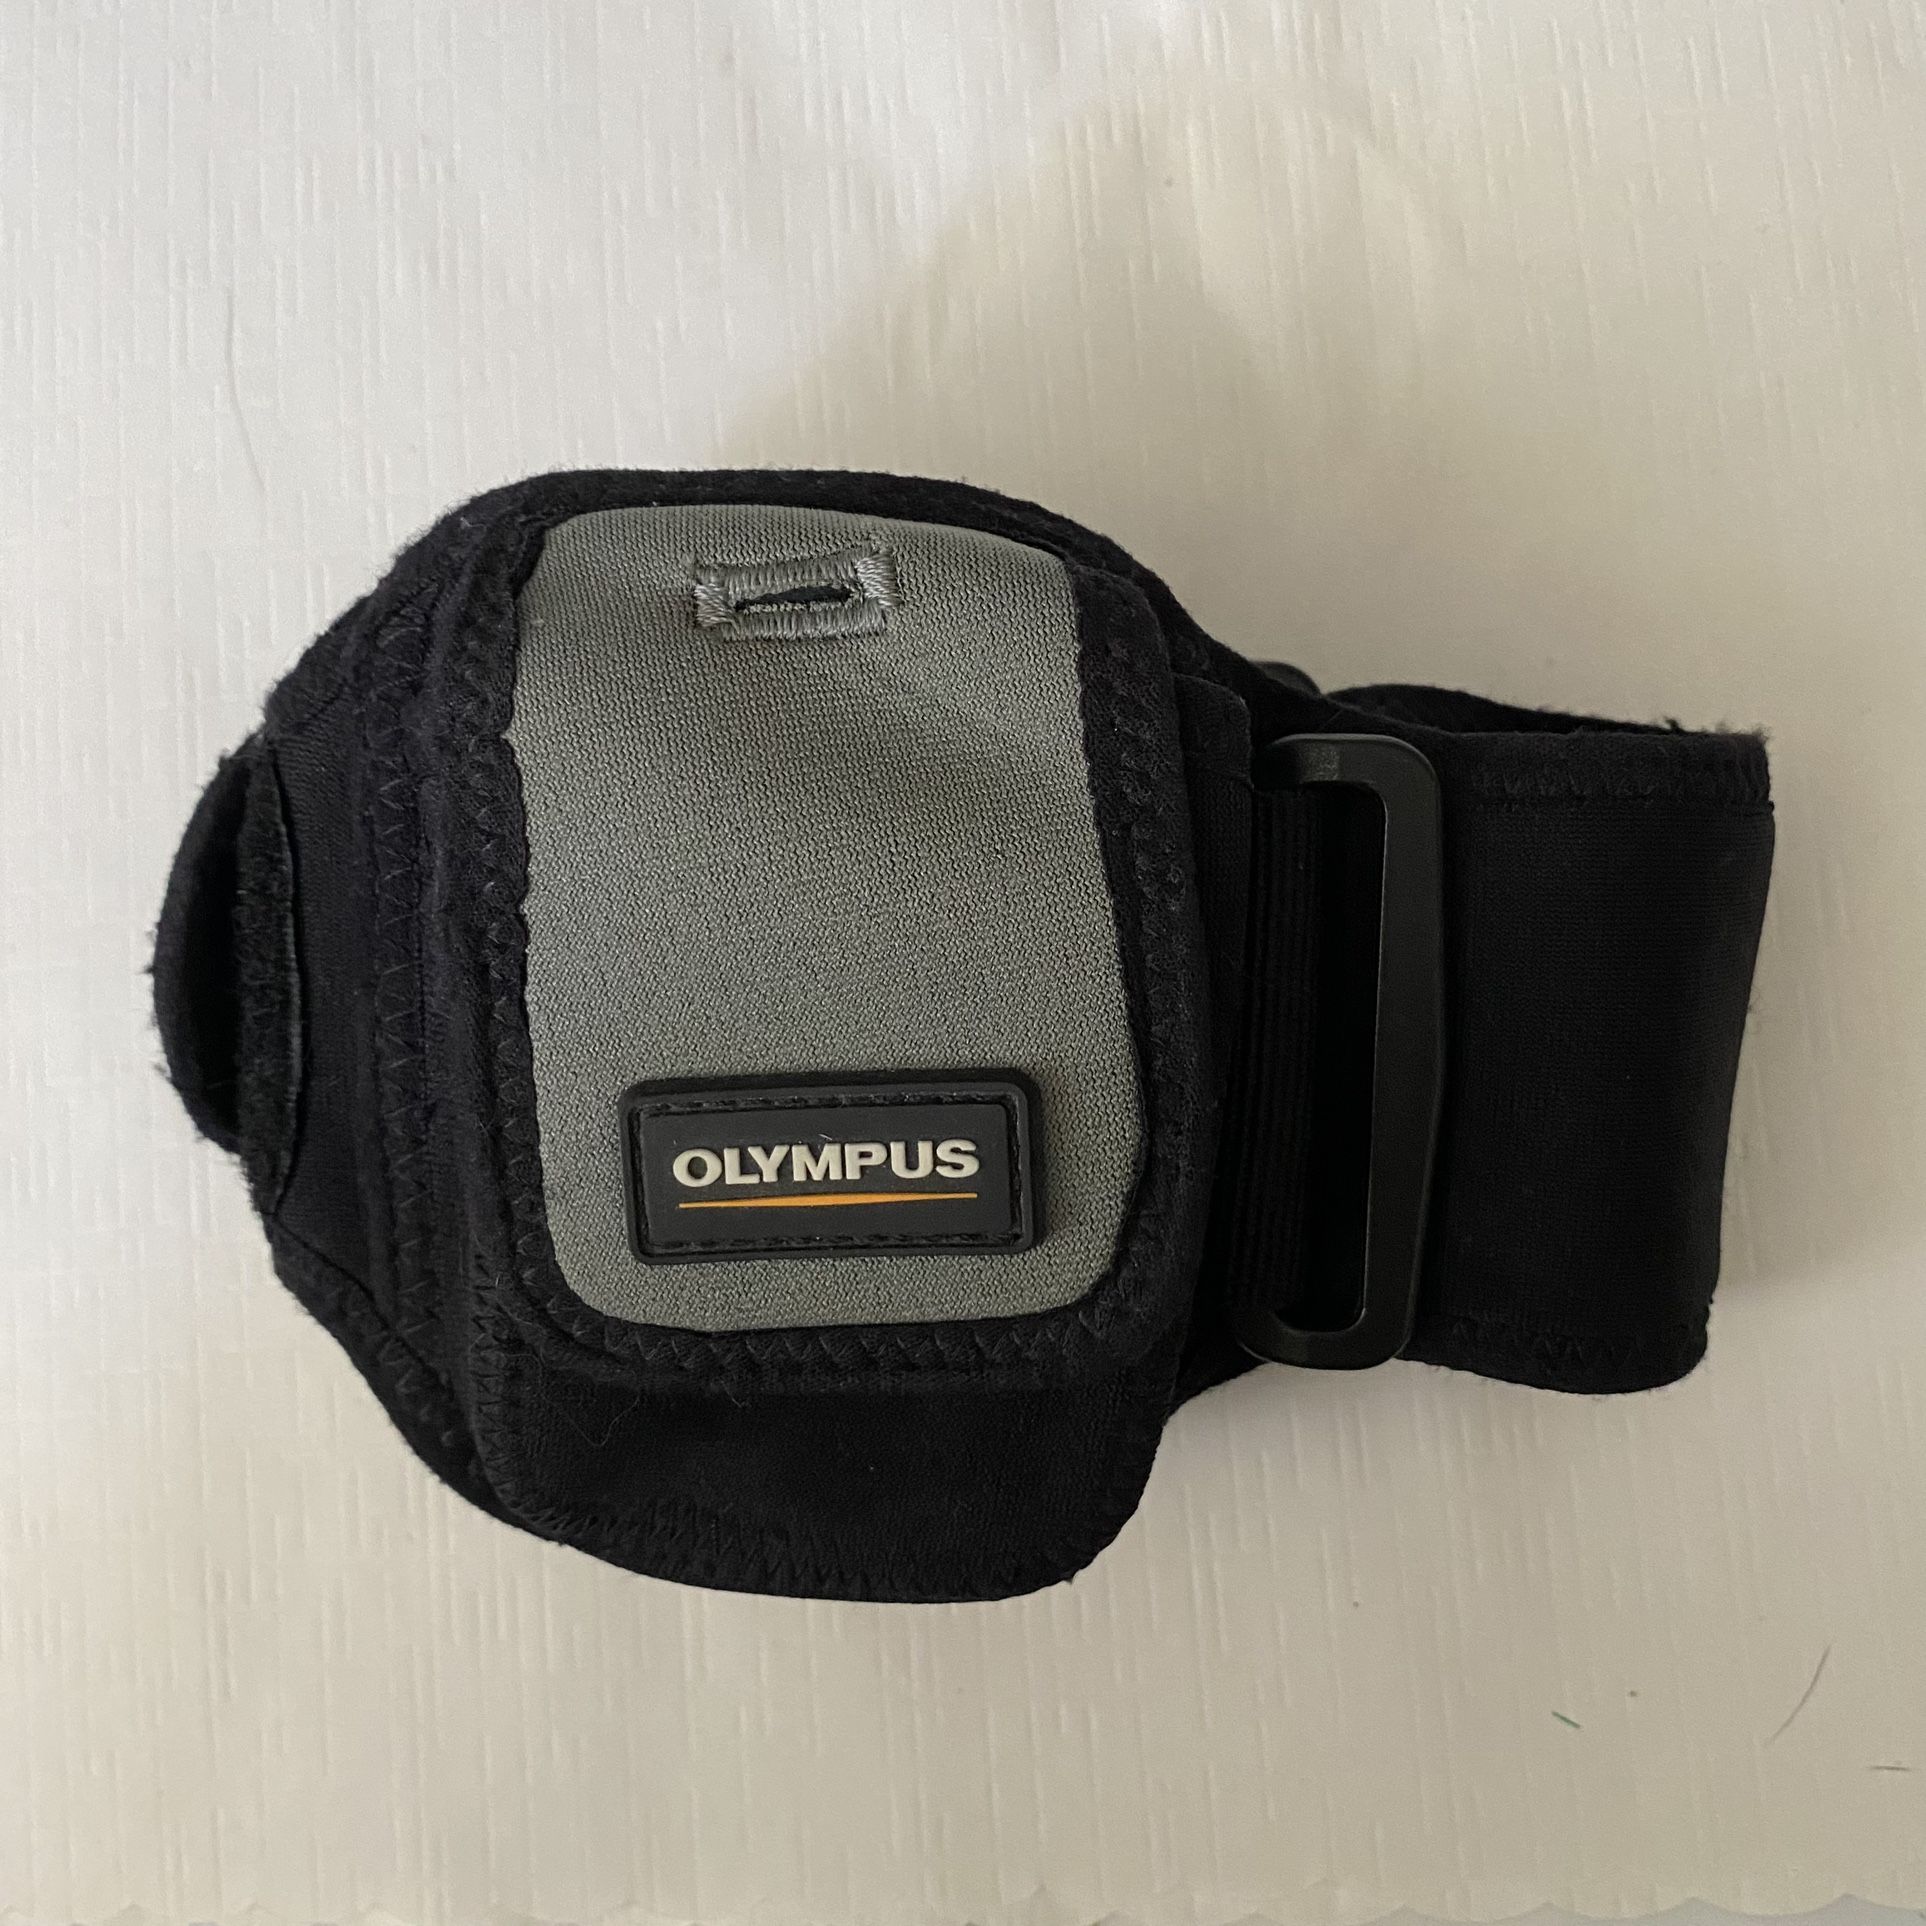 Olympus Neoprene Case with Wrist Strap For Compact Camera